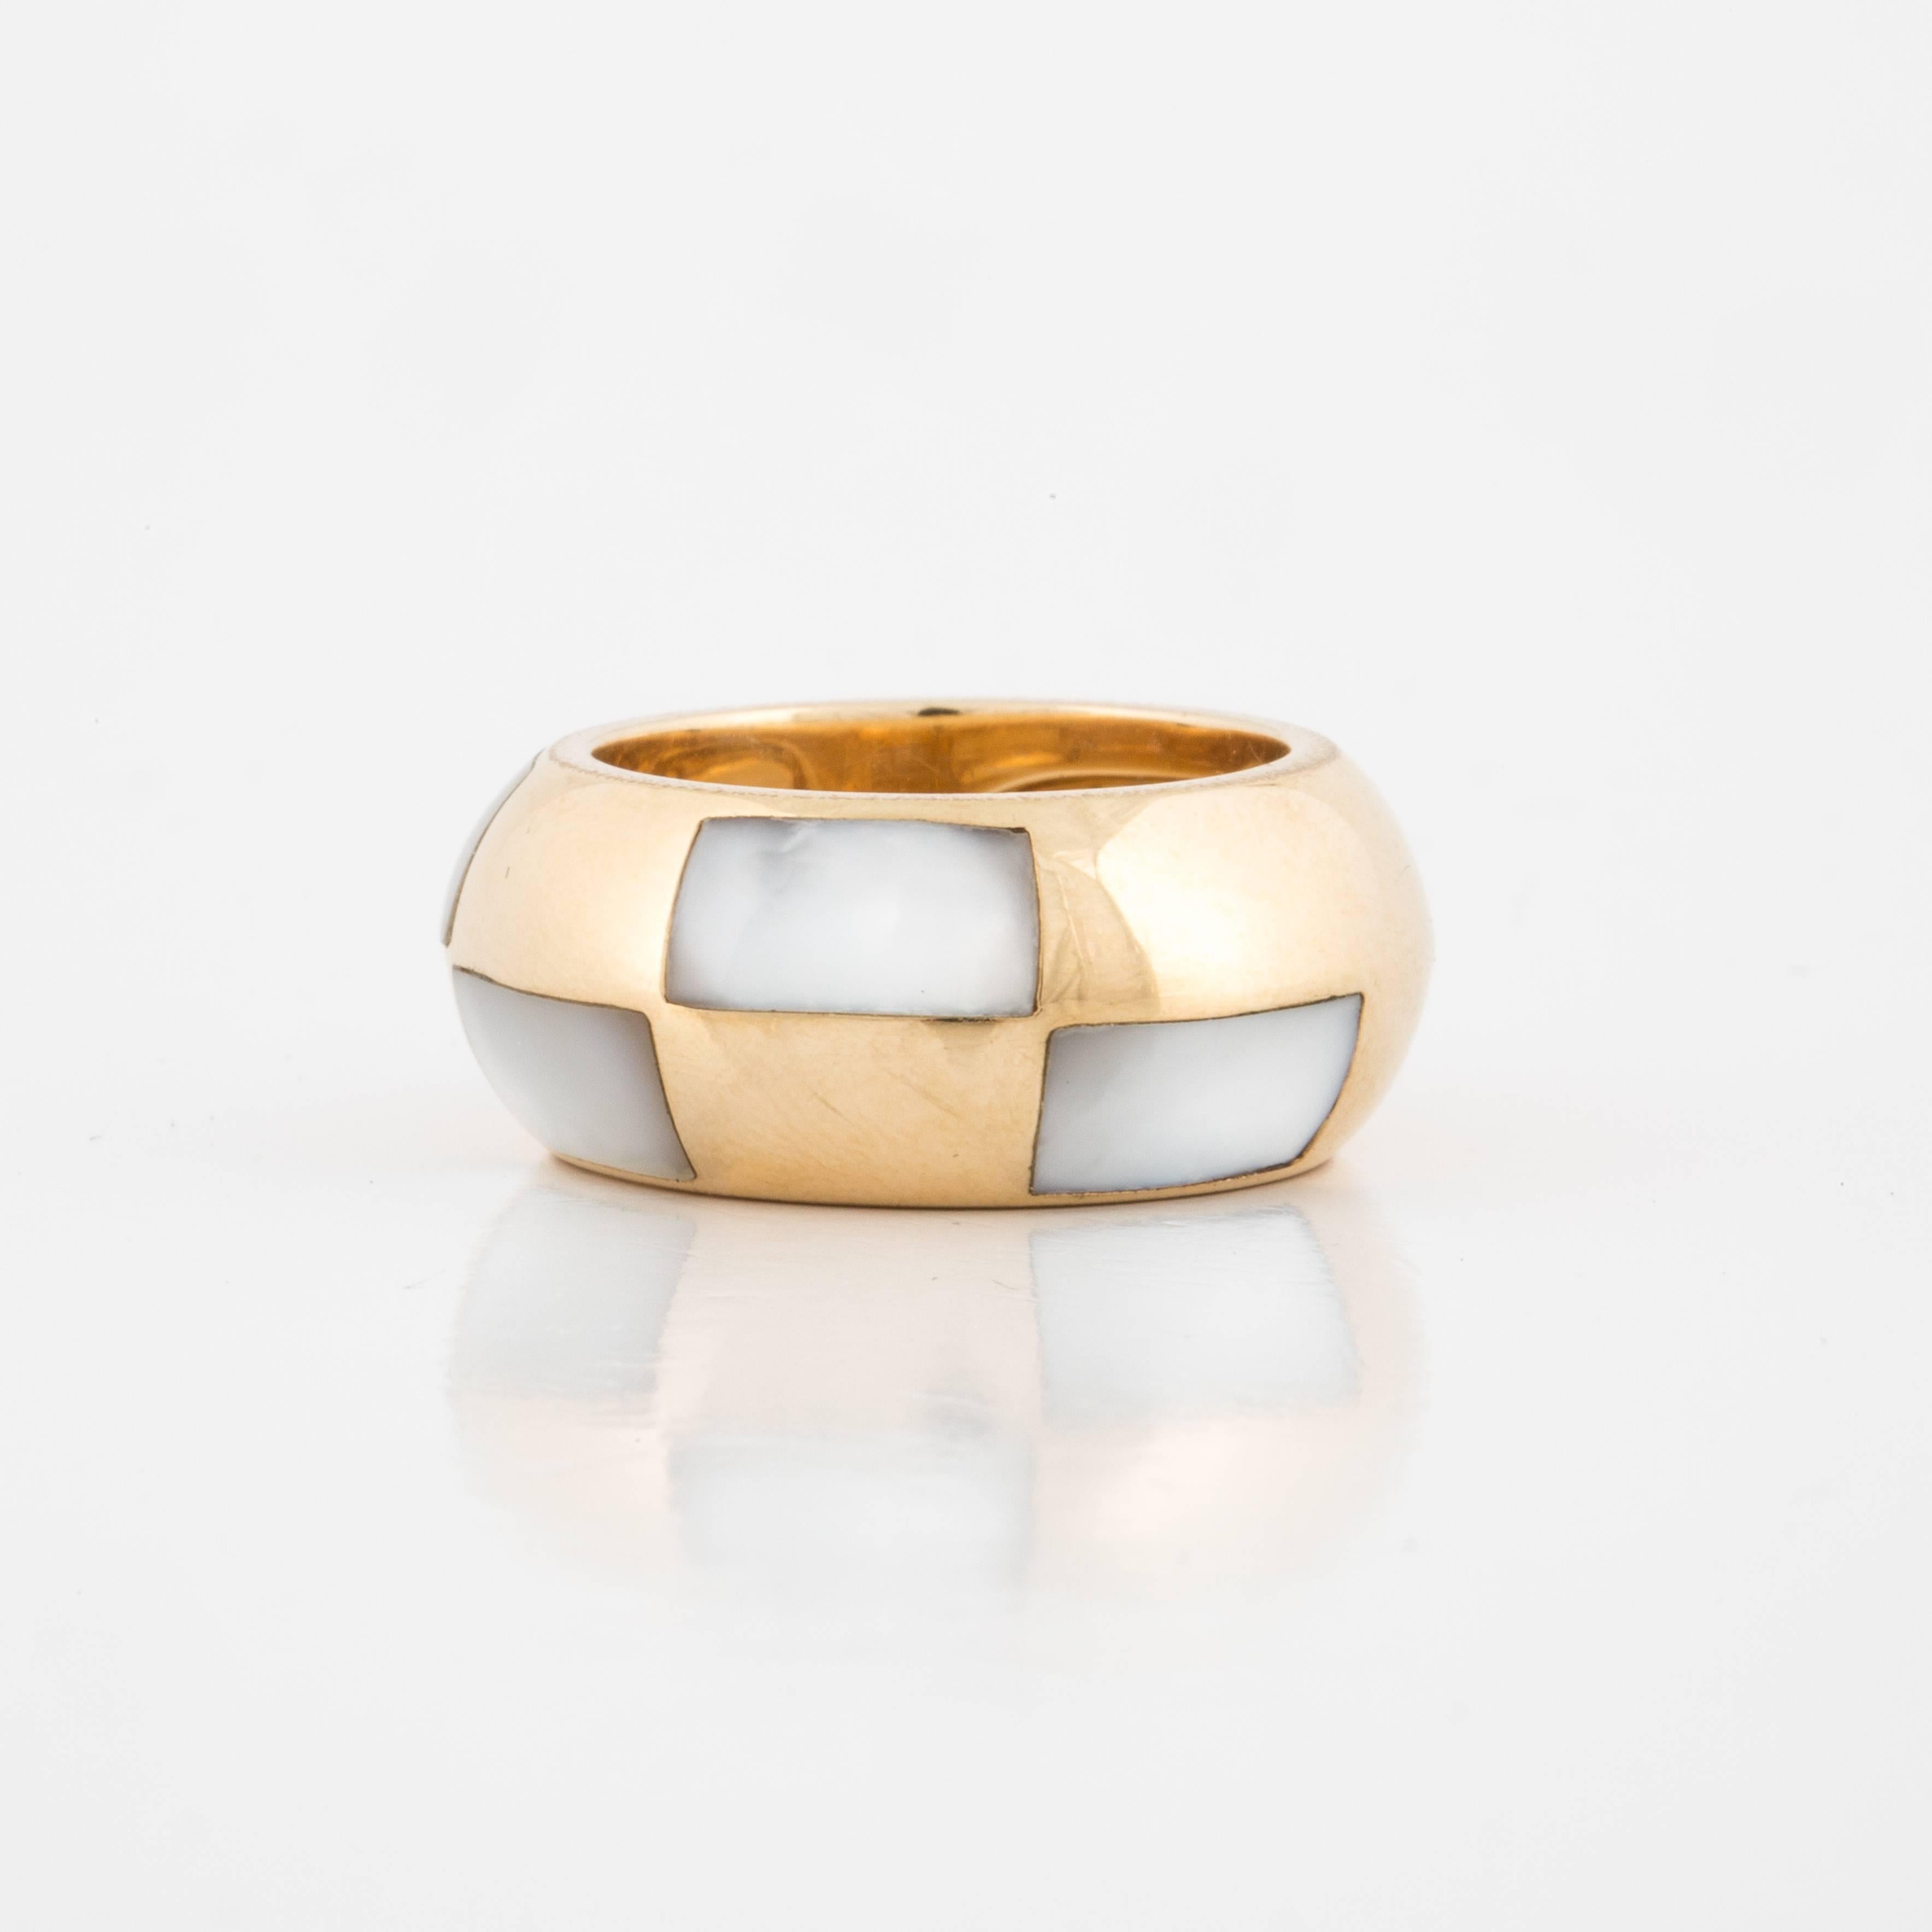 Mauboussin ring composed of 18K yellow gold with five trapezoid shaped mother-of-pearl inlays.   It is marked on the inside, 